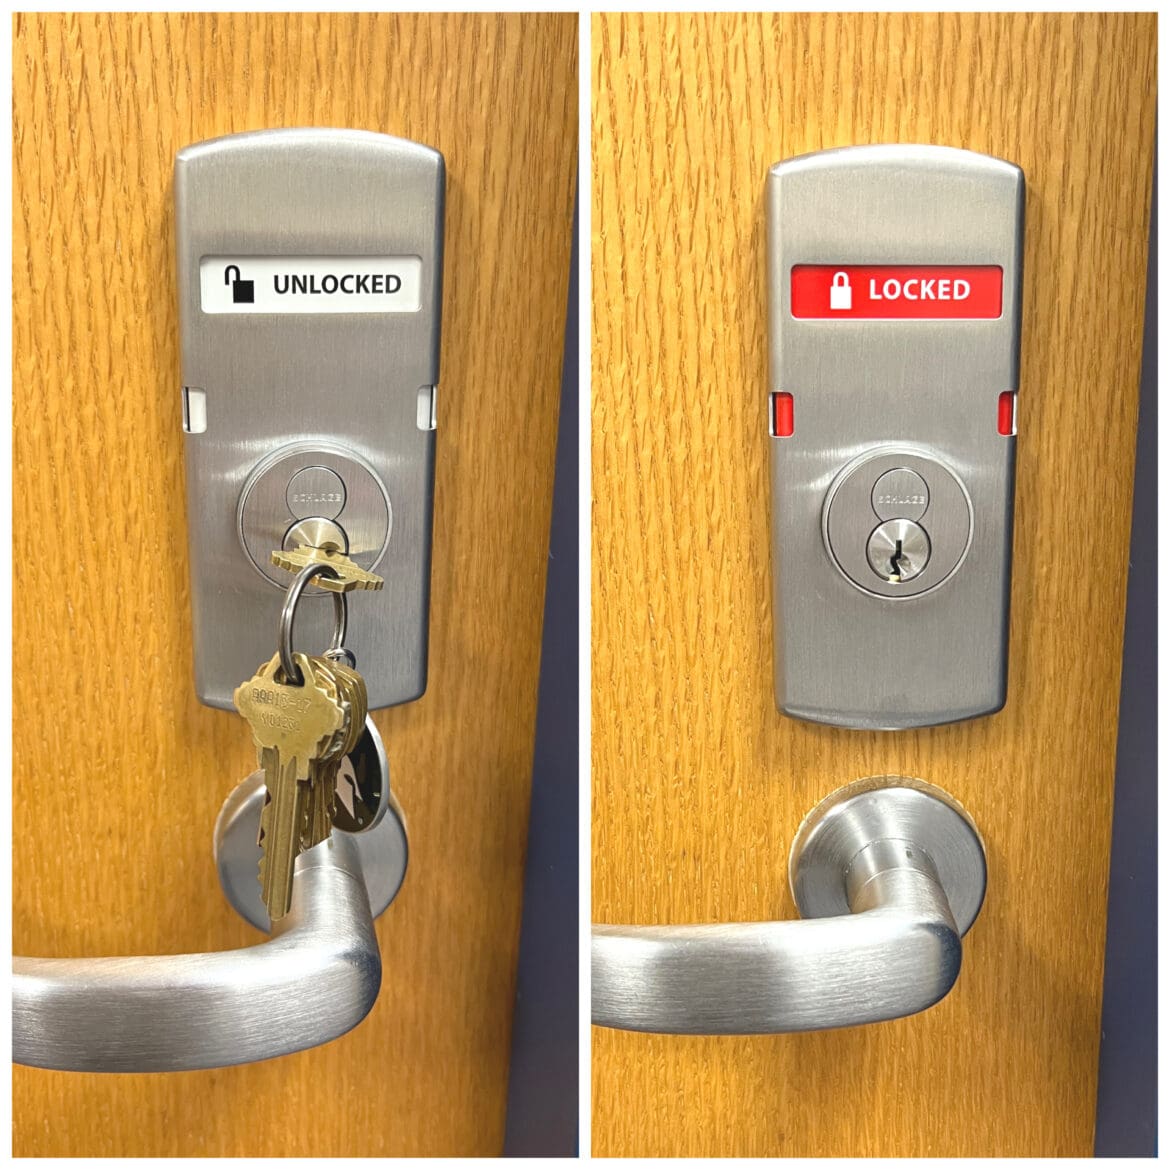 New locks at PHS allow doors to be locked from inside classrooms